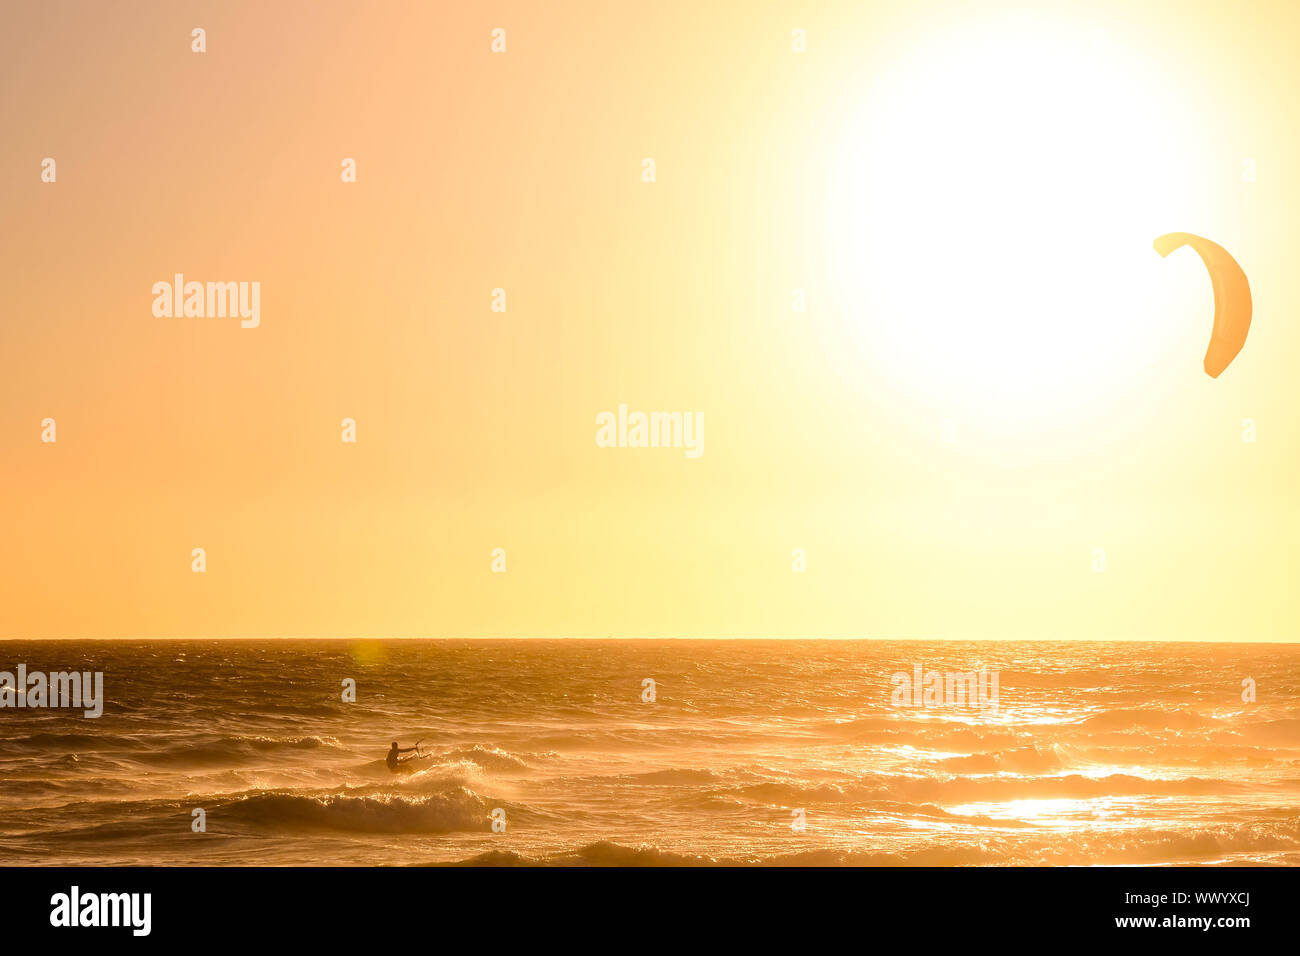 Surfer at sunset on a calm ocean Stock Photo